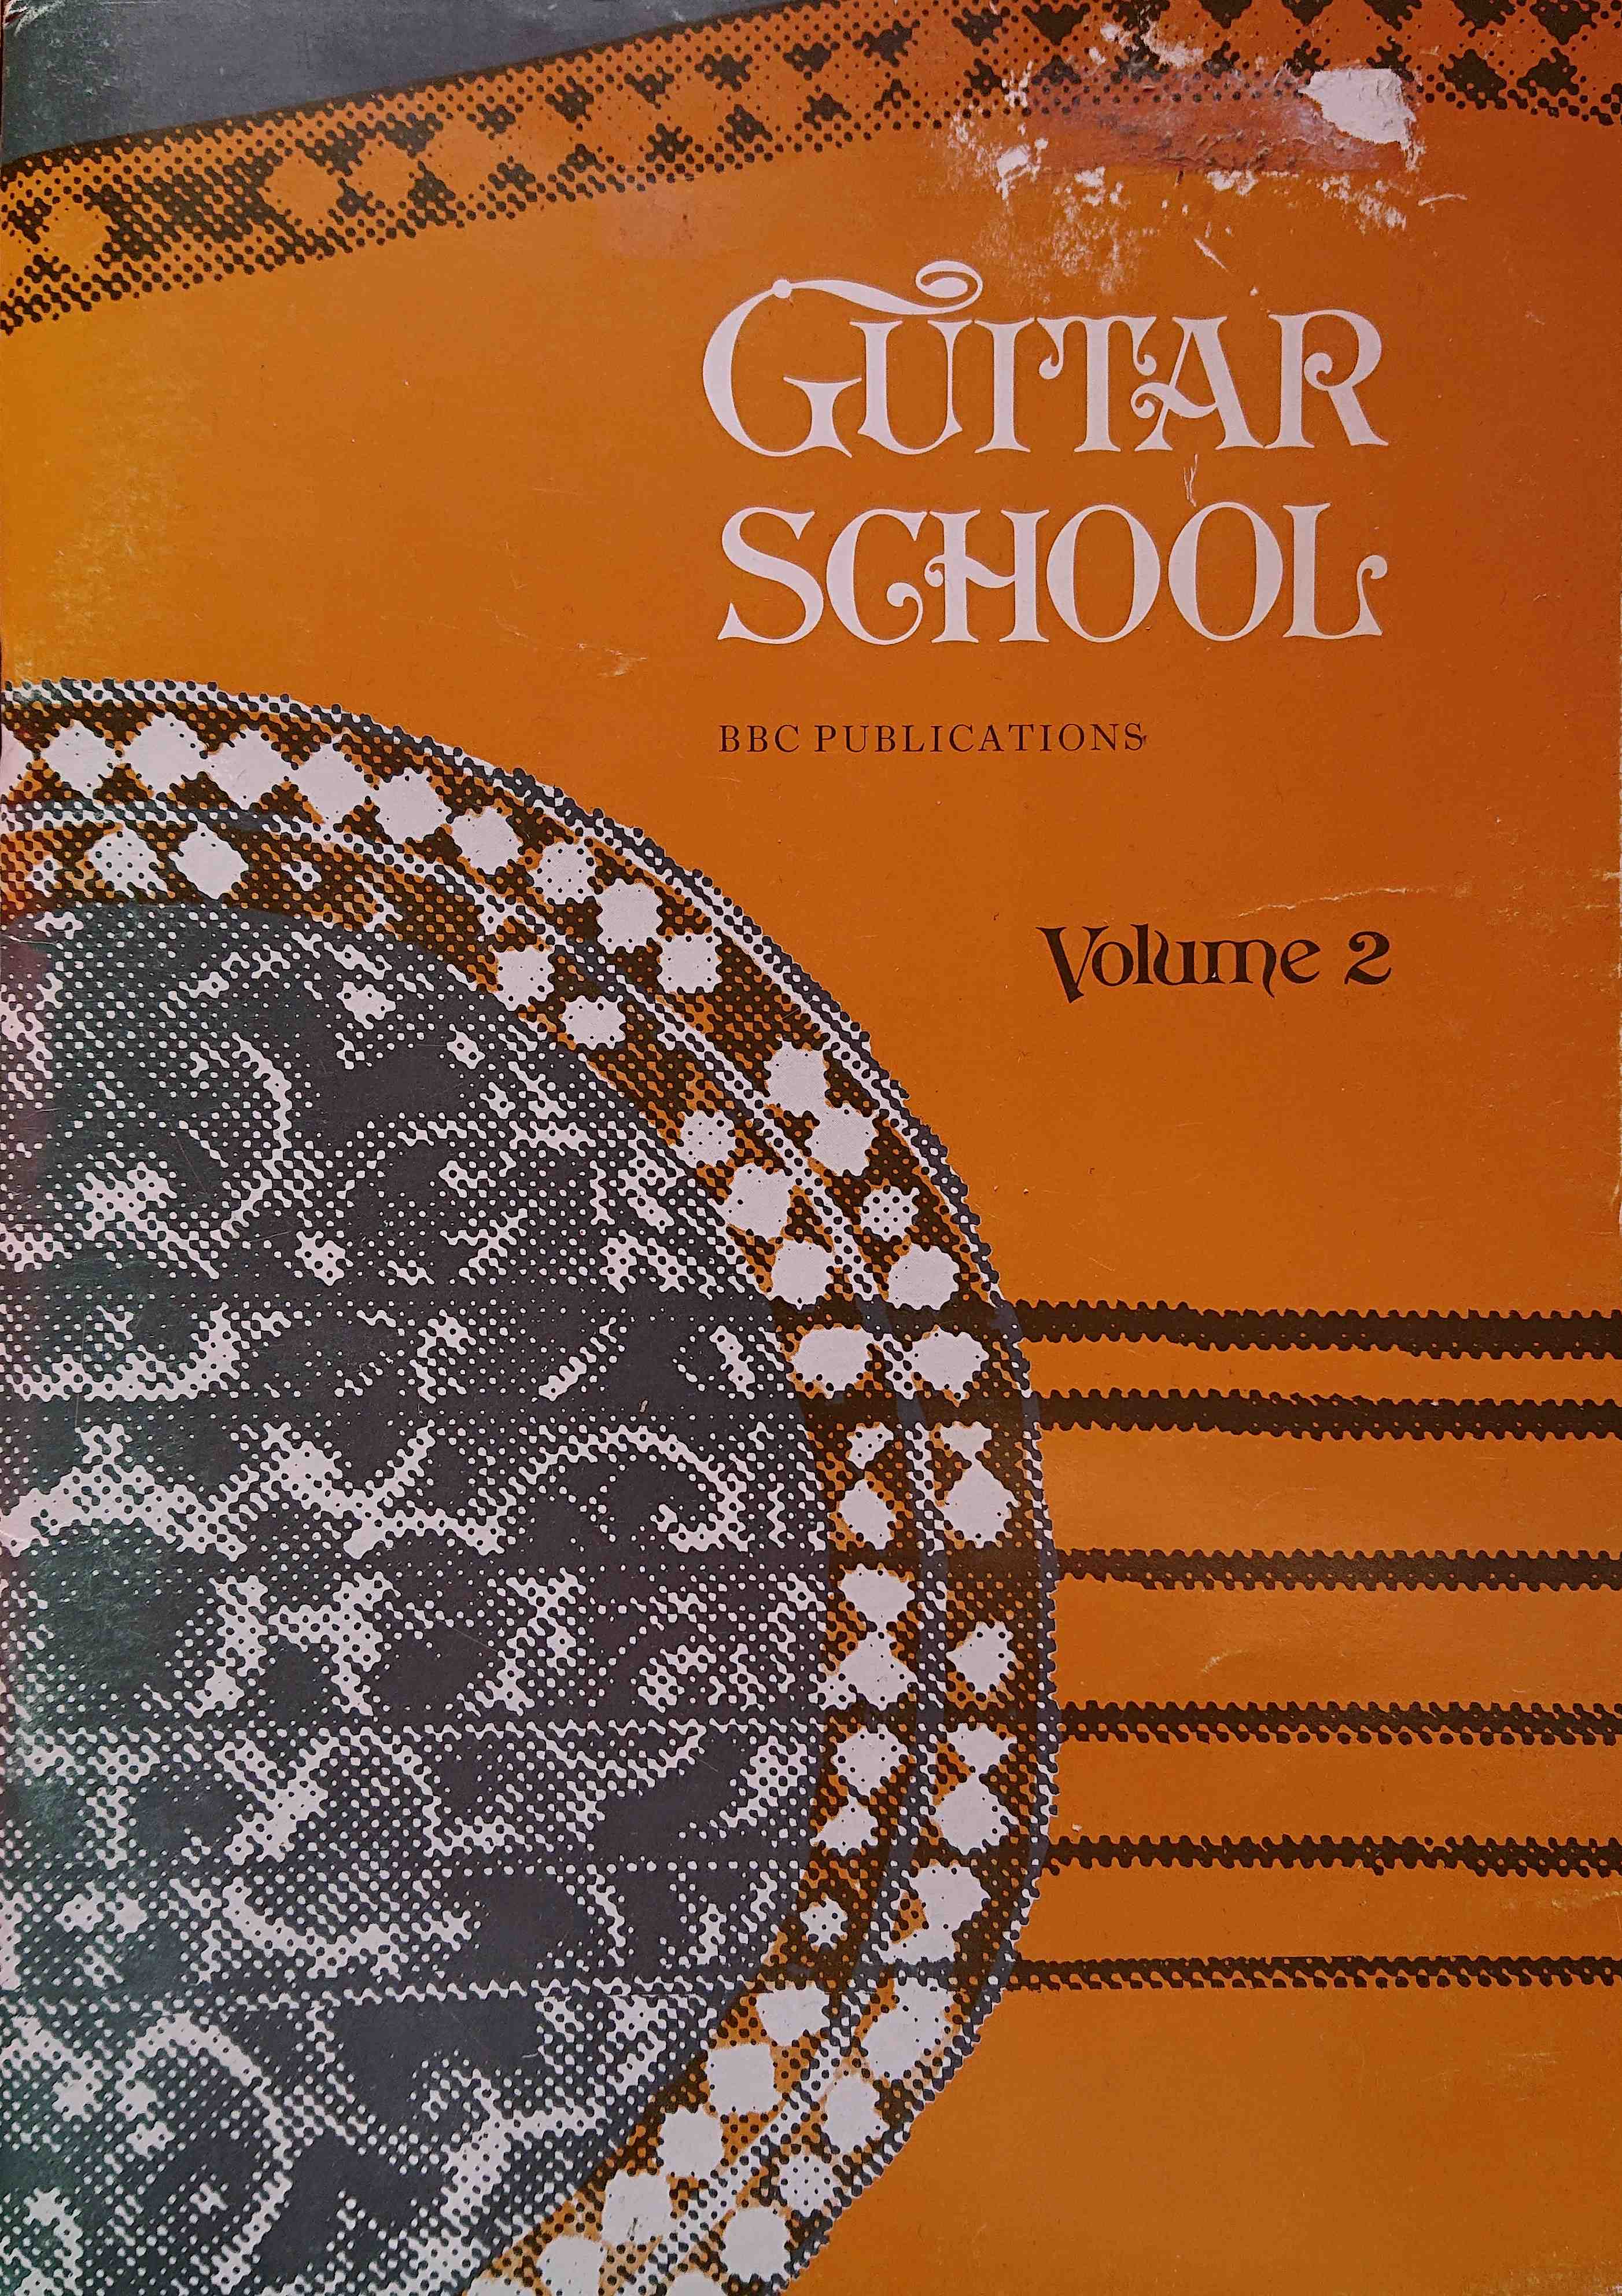 Picture of ISBN 0 563 11267 0 Guitar school - Volume 2 by artist Michael Jessett from the BBC records and Tapes library